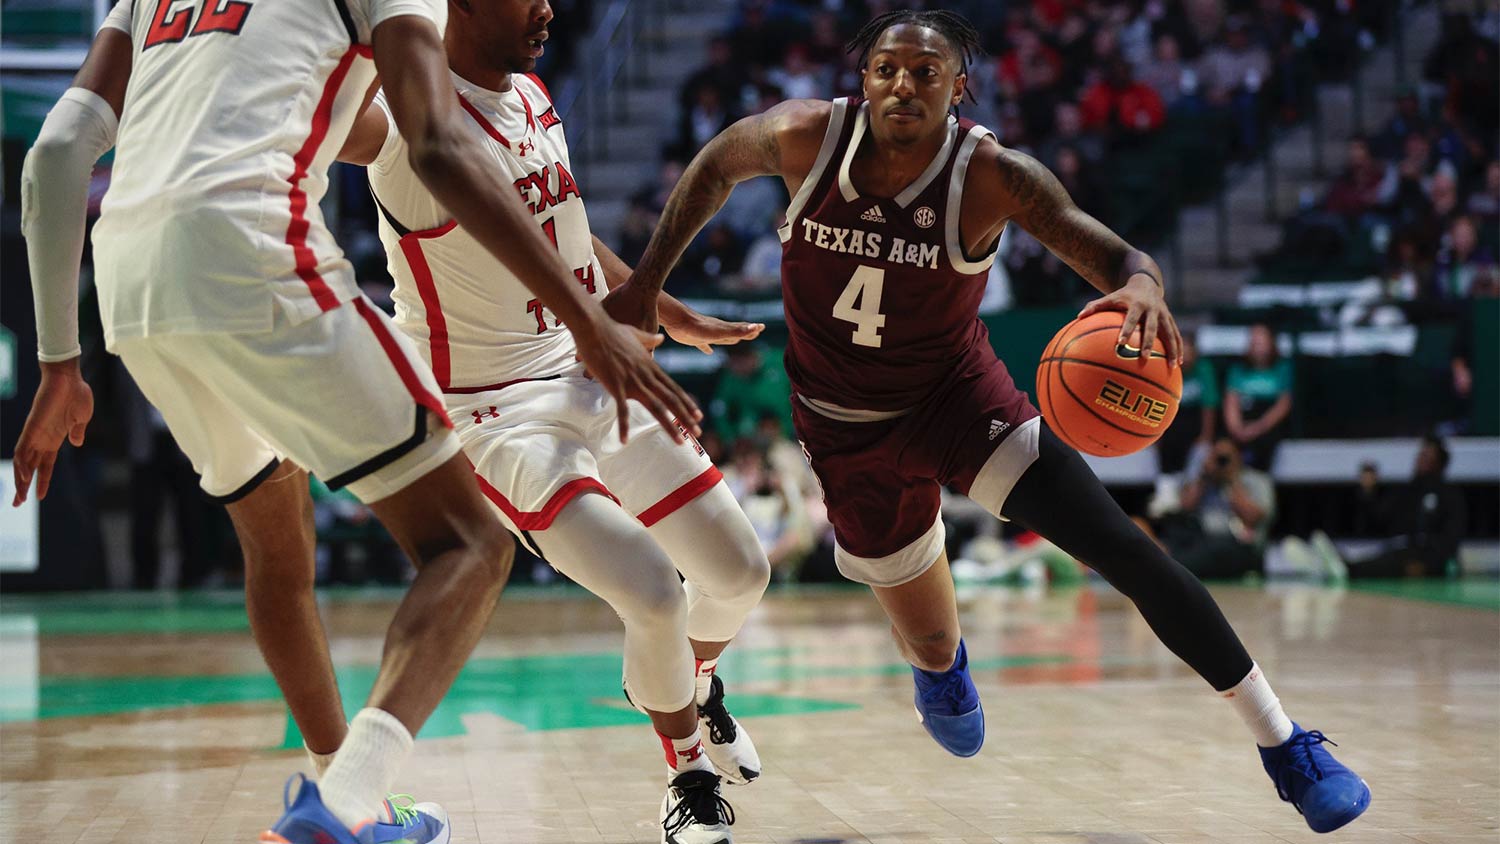 A Texas A&M basketball player dribbles past the defense toward the basket